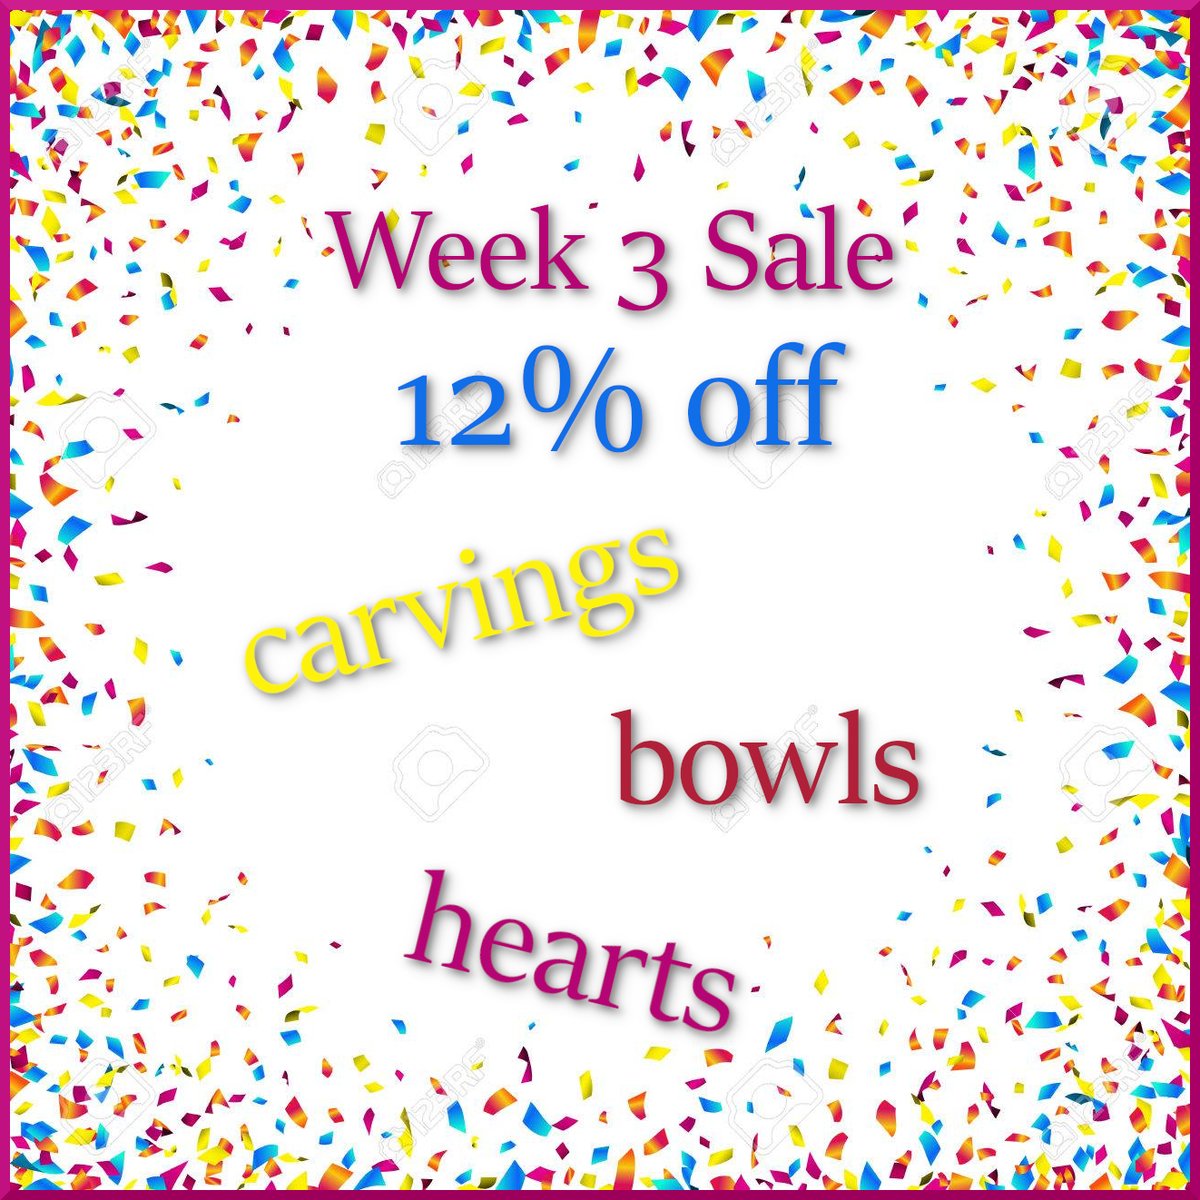 Happy Week 3 of Customer Appreciation Month at the Pennywise Witch Shop! This week, all carvings, crystal bowls, & hearts are 12% OFF! Carvings: etsy.com/shop/Pennywise…... Bowls: etsy.com/shop/Pennywise…... Hearts: etsy.com/shop/Pennywise…... Share the love by passing it on!